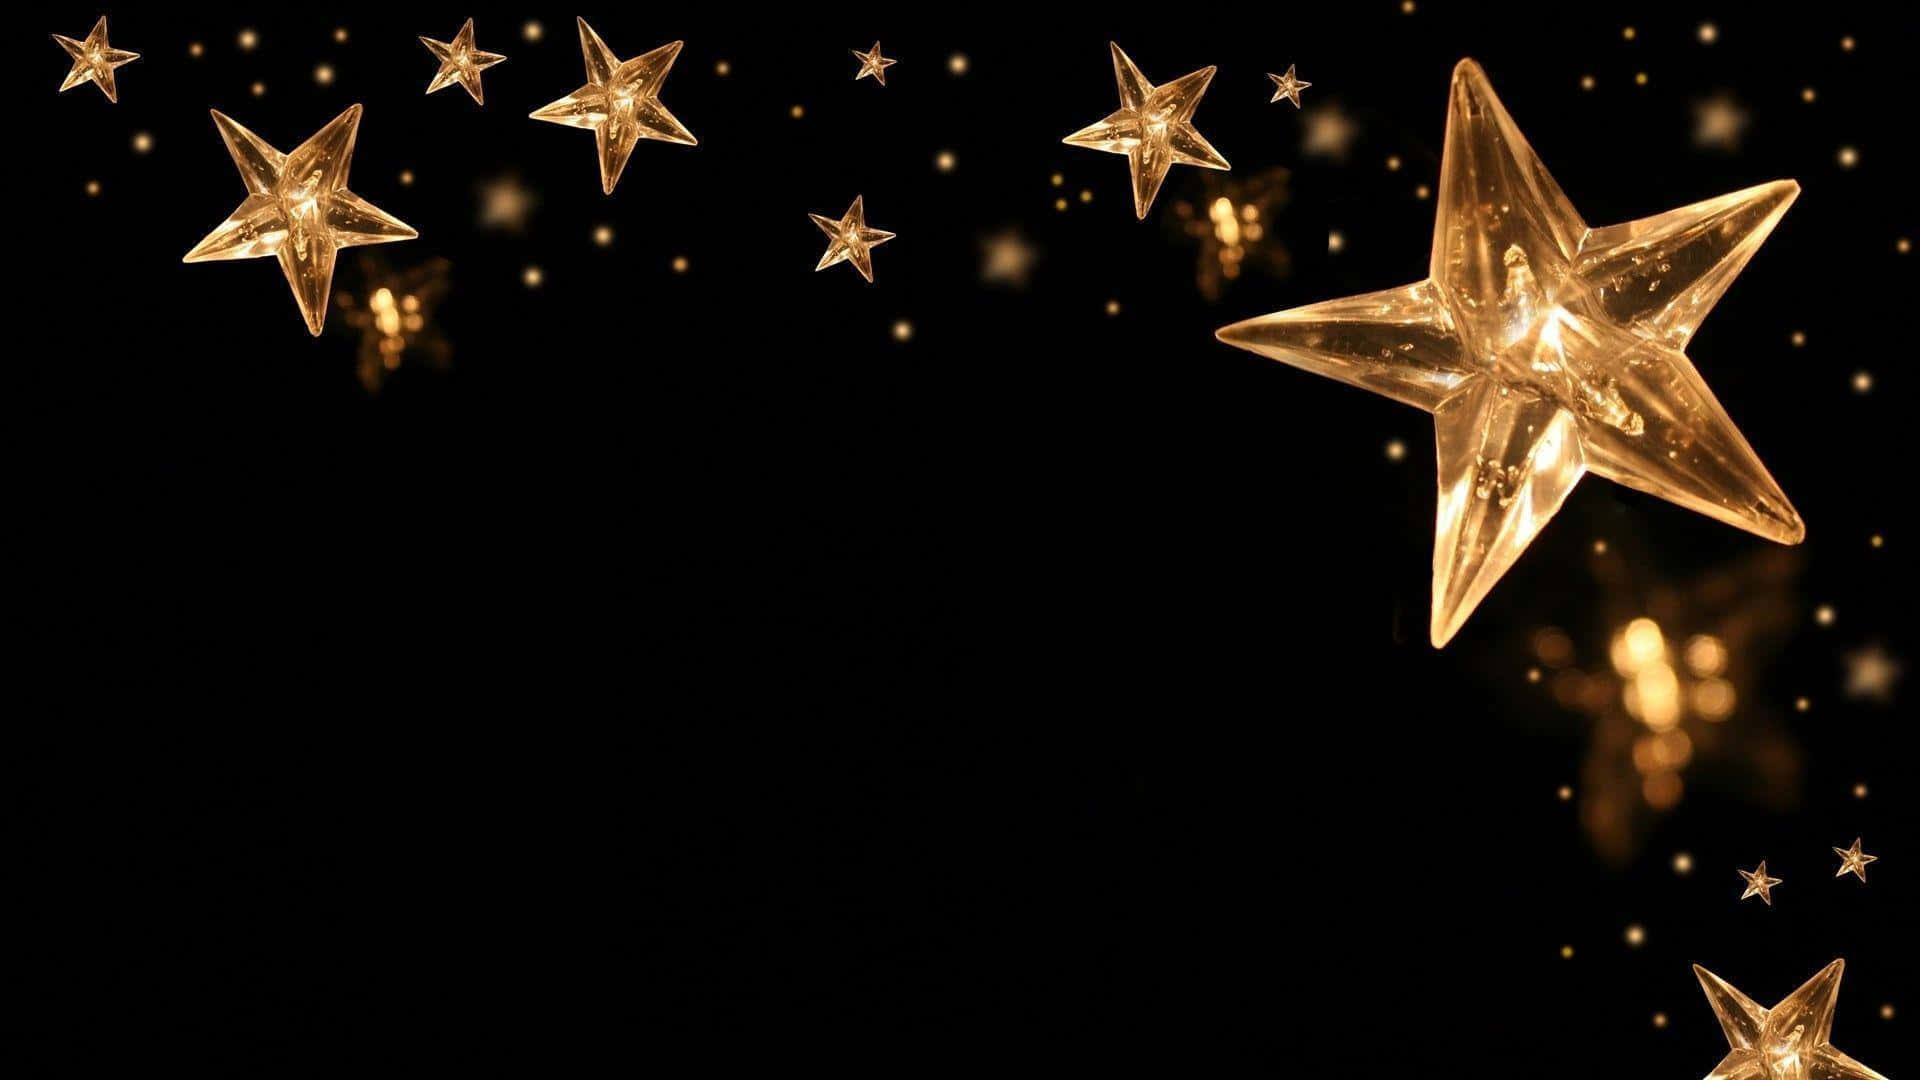 A Black Background With Gold Stars On It Wallpaper